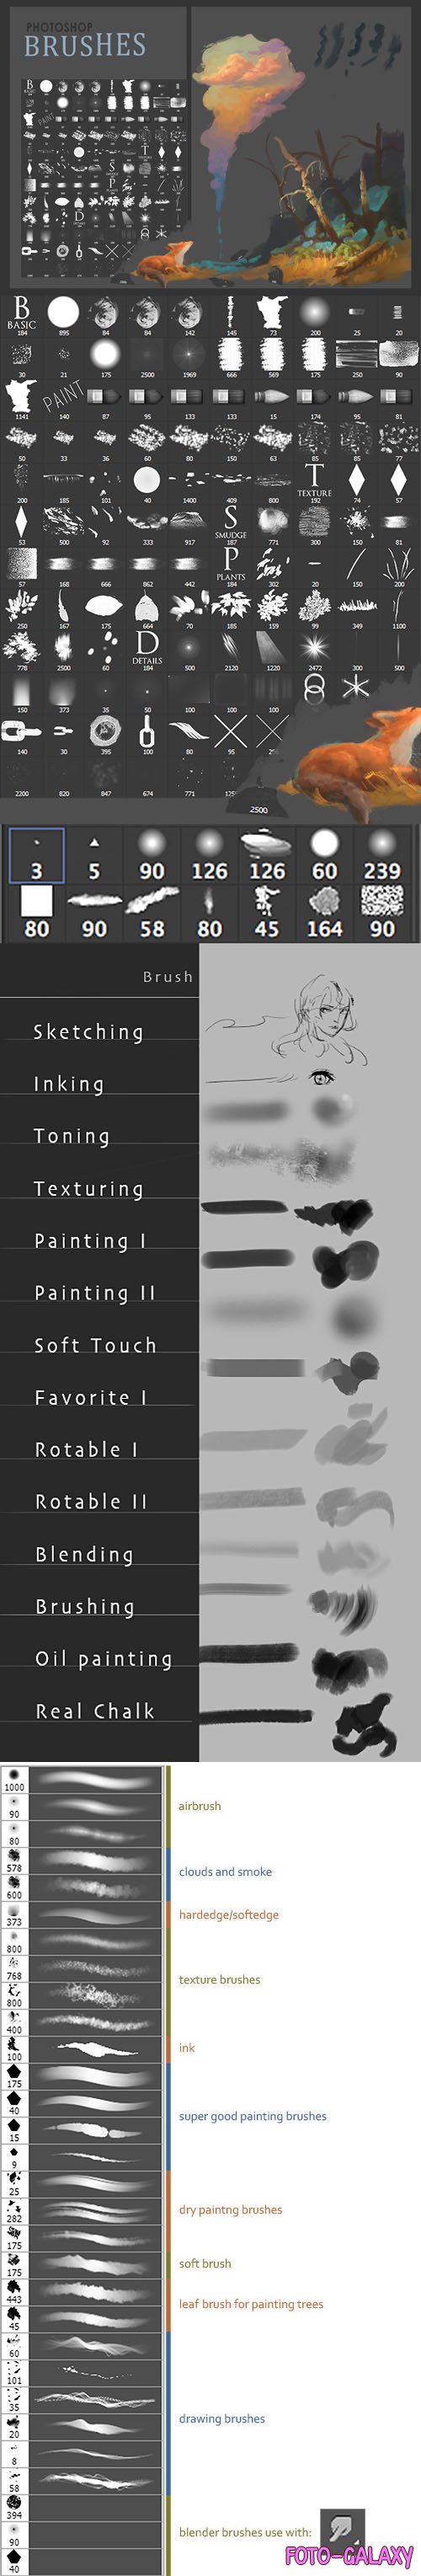 150+ Painting Brushes for Photoshop